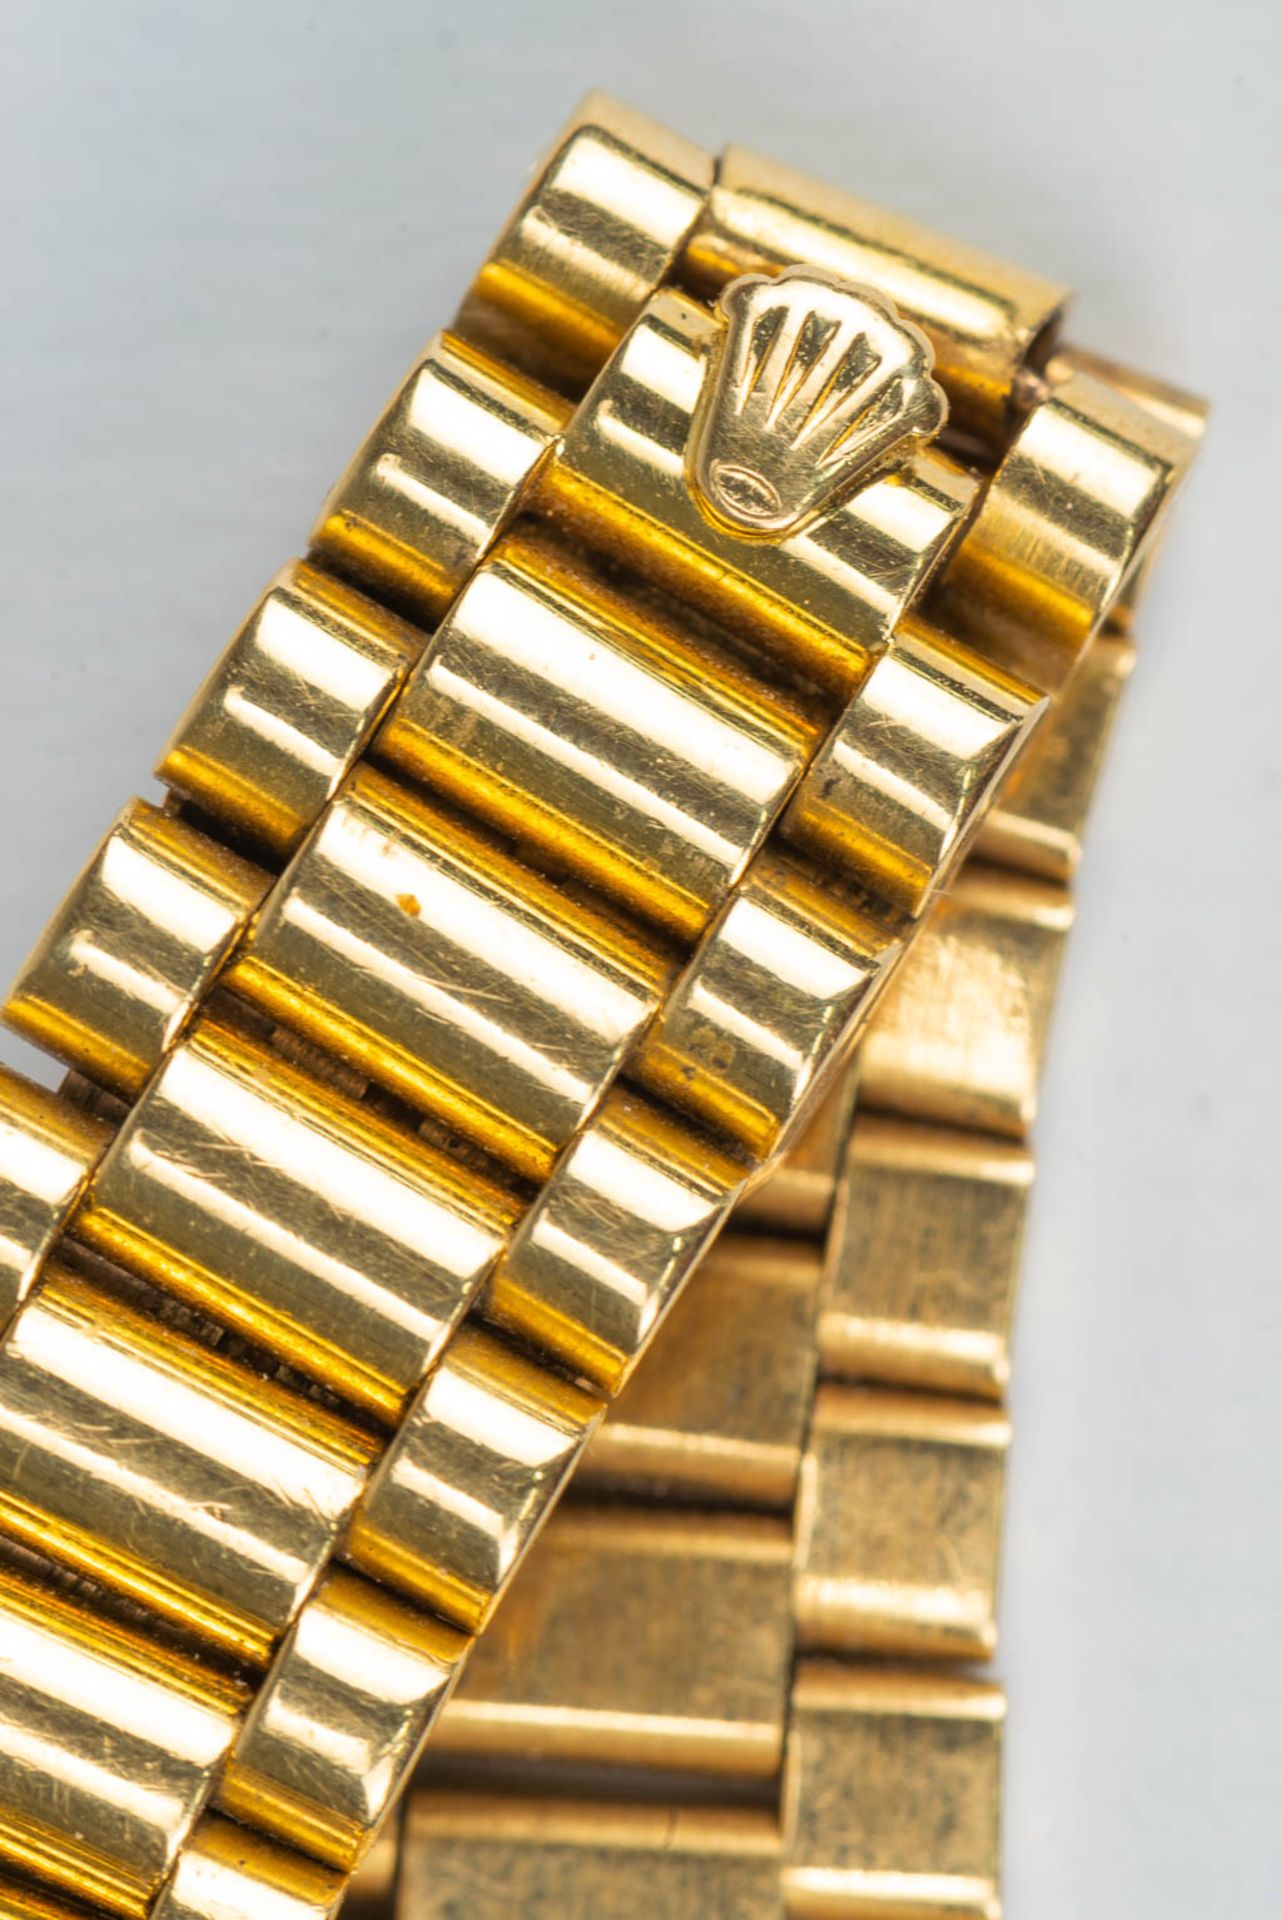 A Rolex Datejust ladies model 69178 made of 18kt gold with bracelet, original box and papers. 26mm. - Image 8 of 11